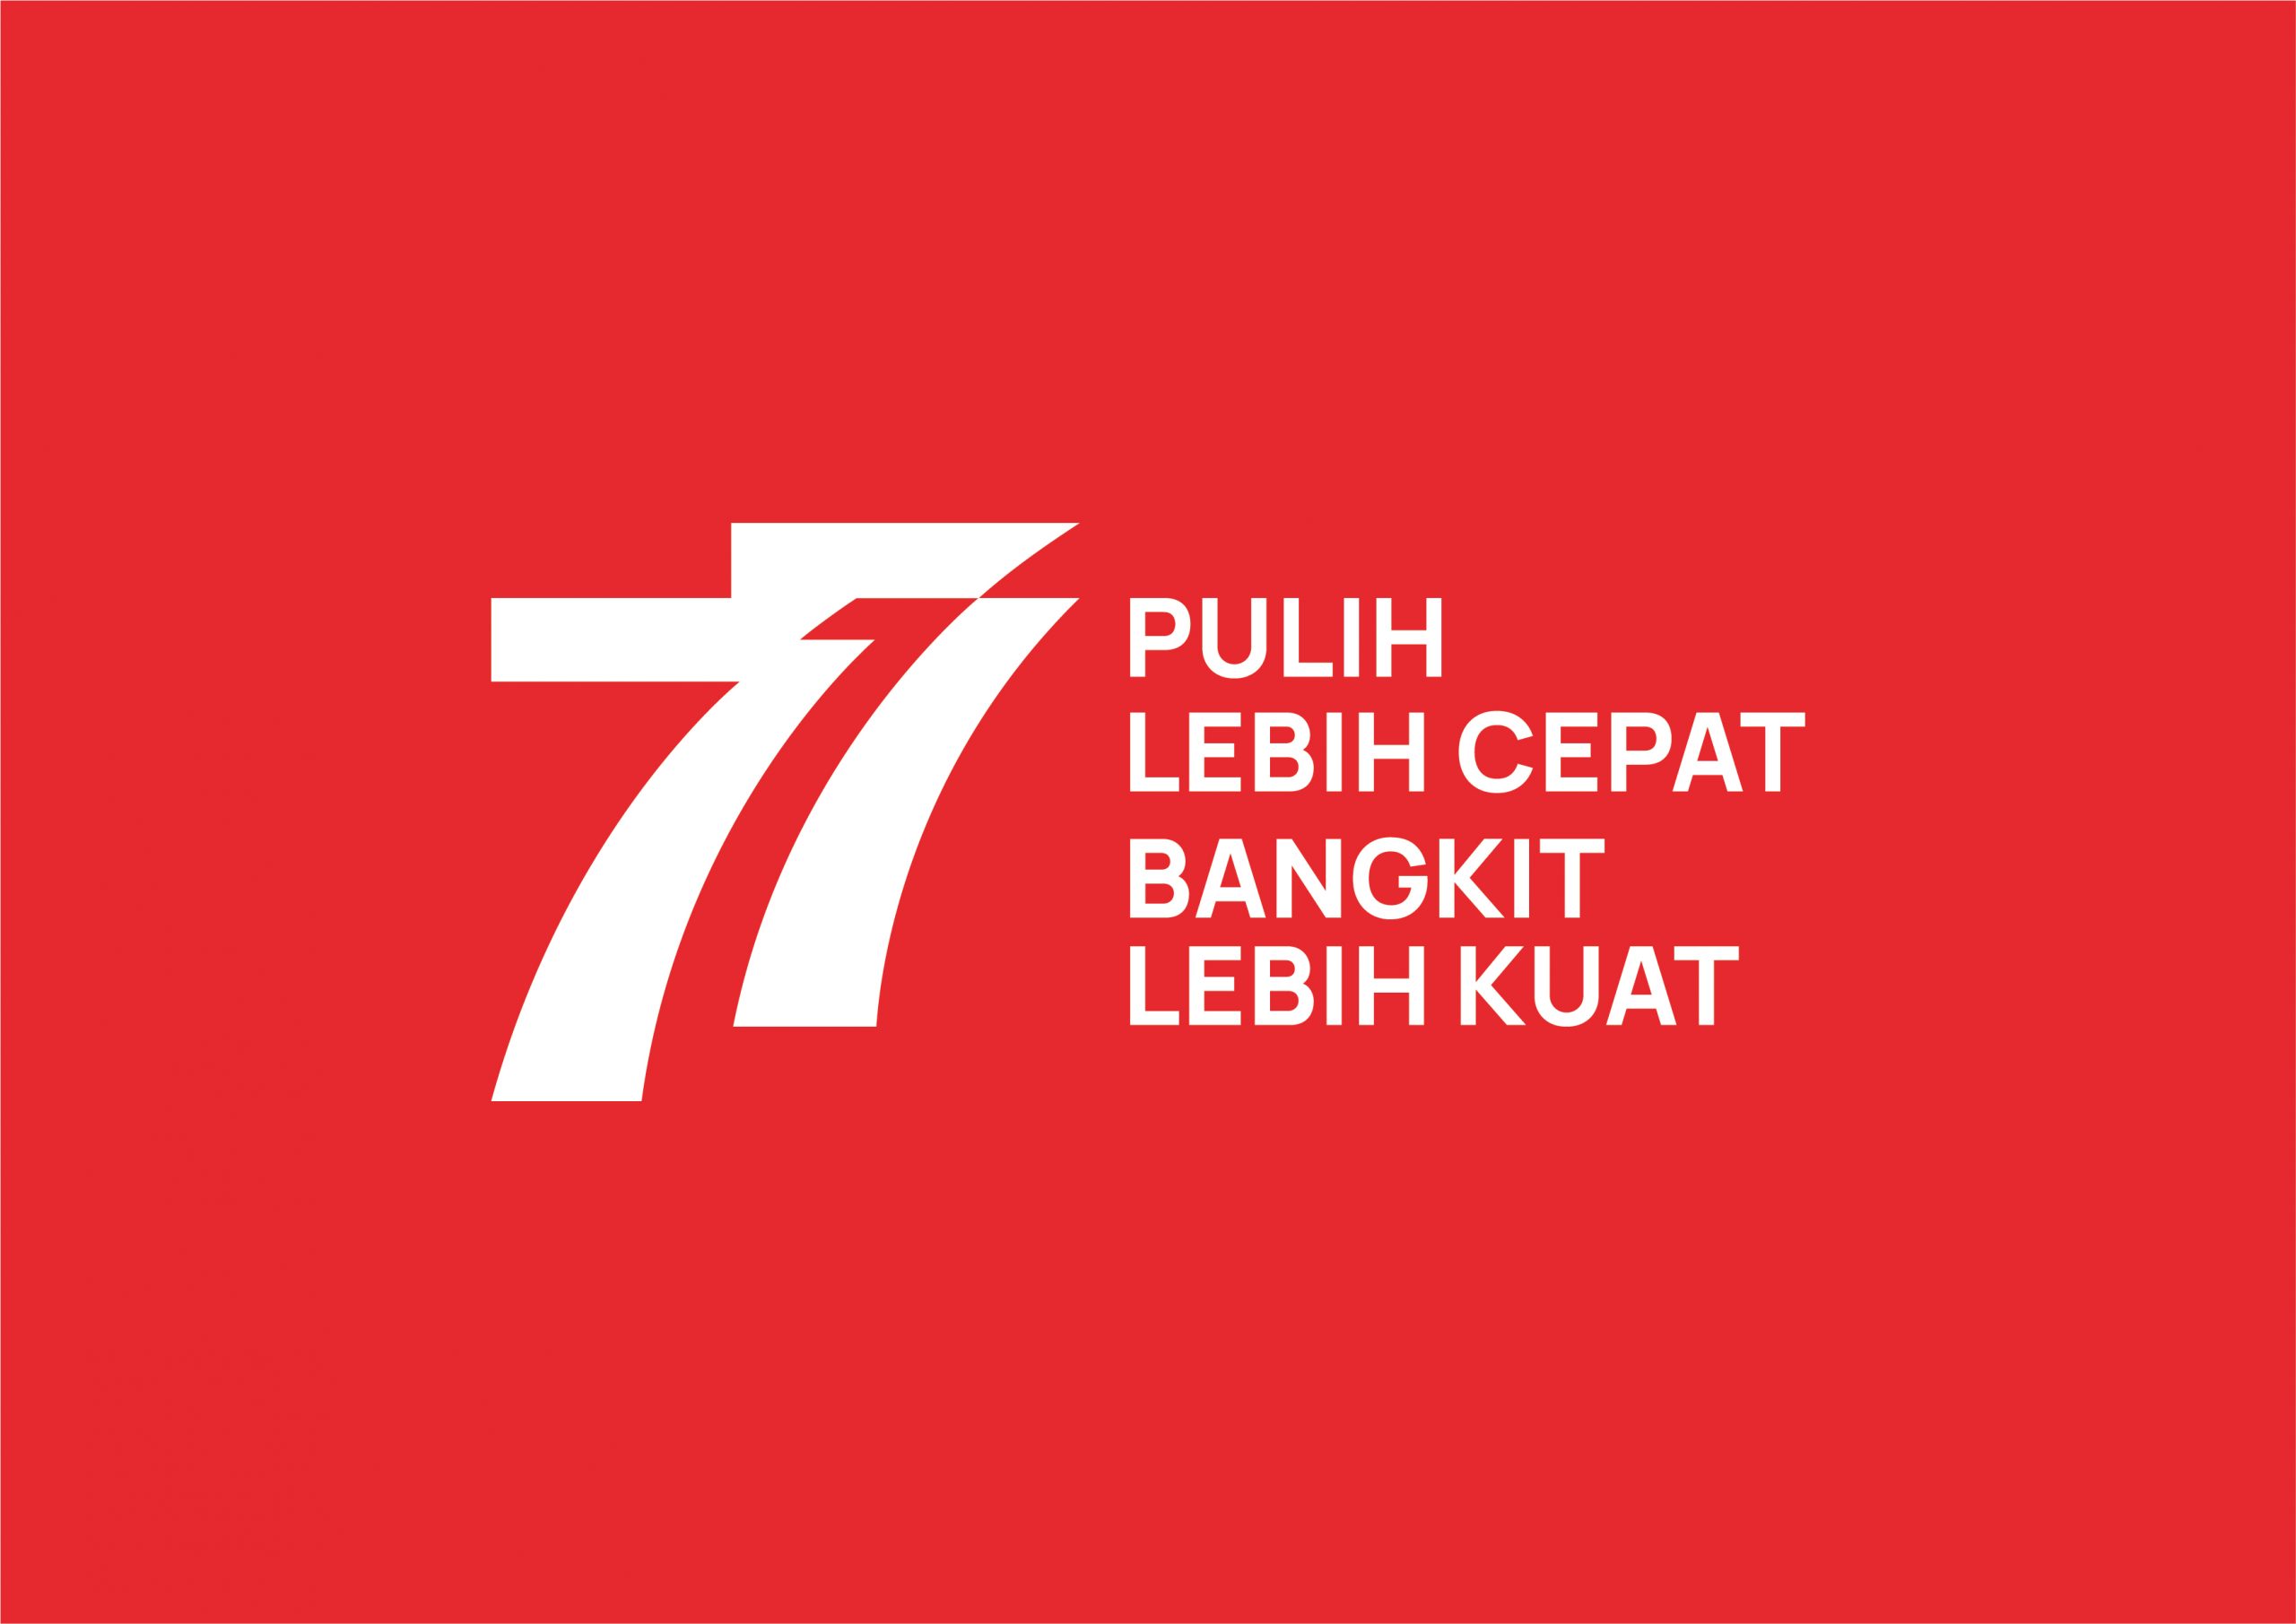 Commemoration of the 77th Anniversary of the Independence of the Republic of Indonesia in 2022